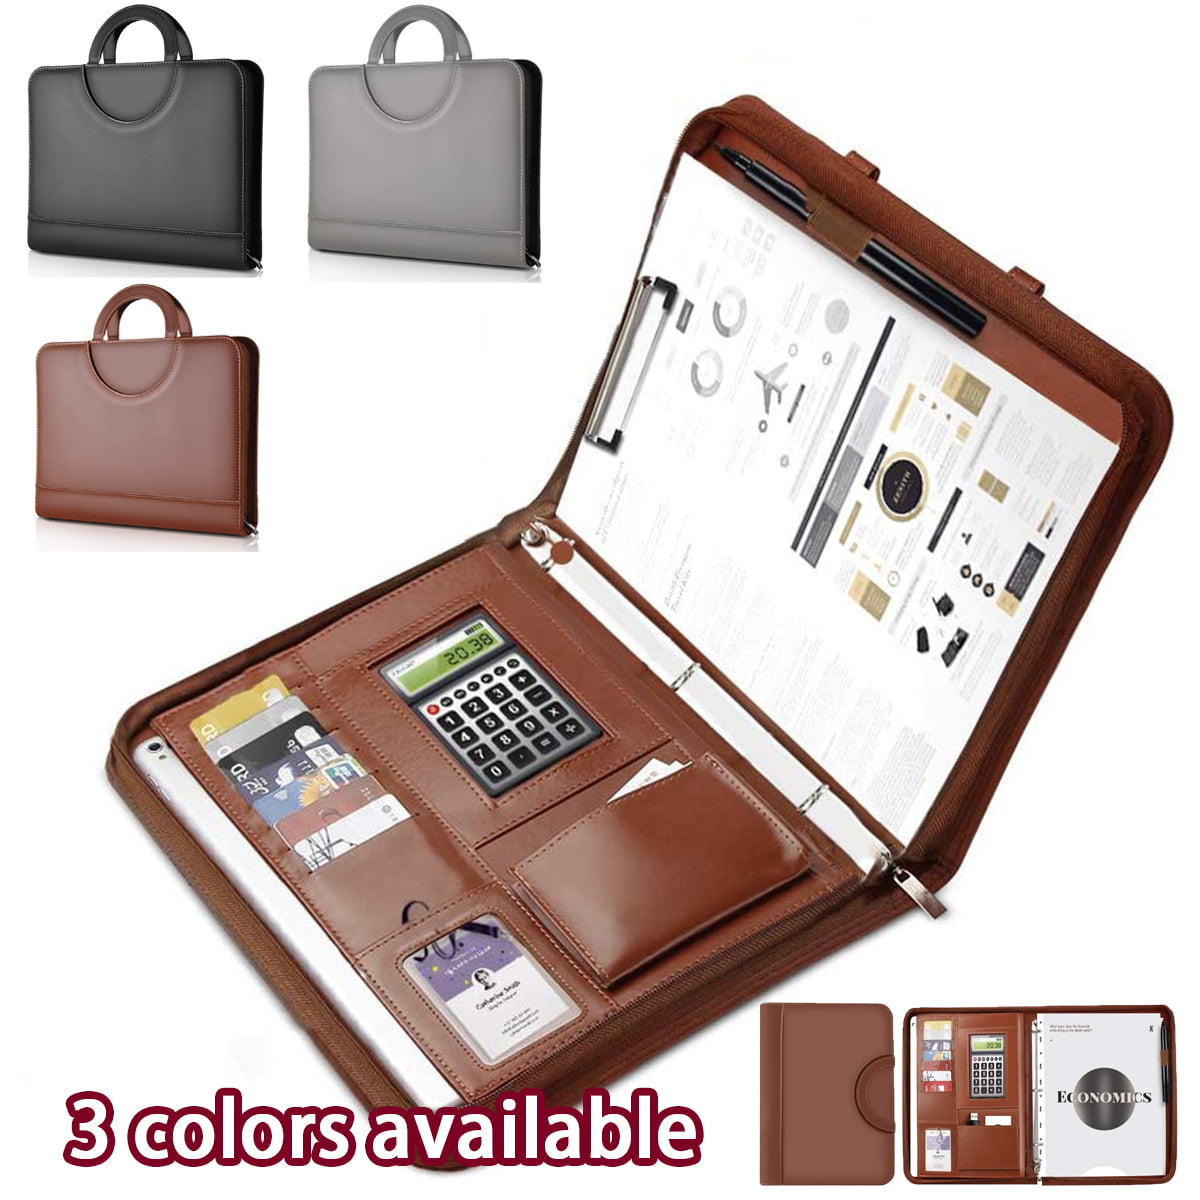 3 Ring Binder File Storage Bag Suitable for Business Trips Interviews Meetings Gray AtailorBird A4 PU Leather Portfolio Folder with Zipper & Phone Holder 